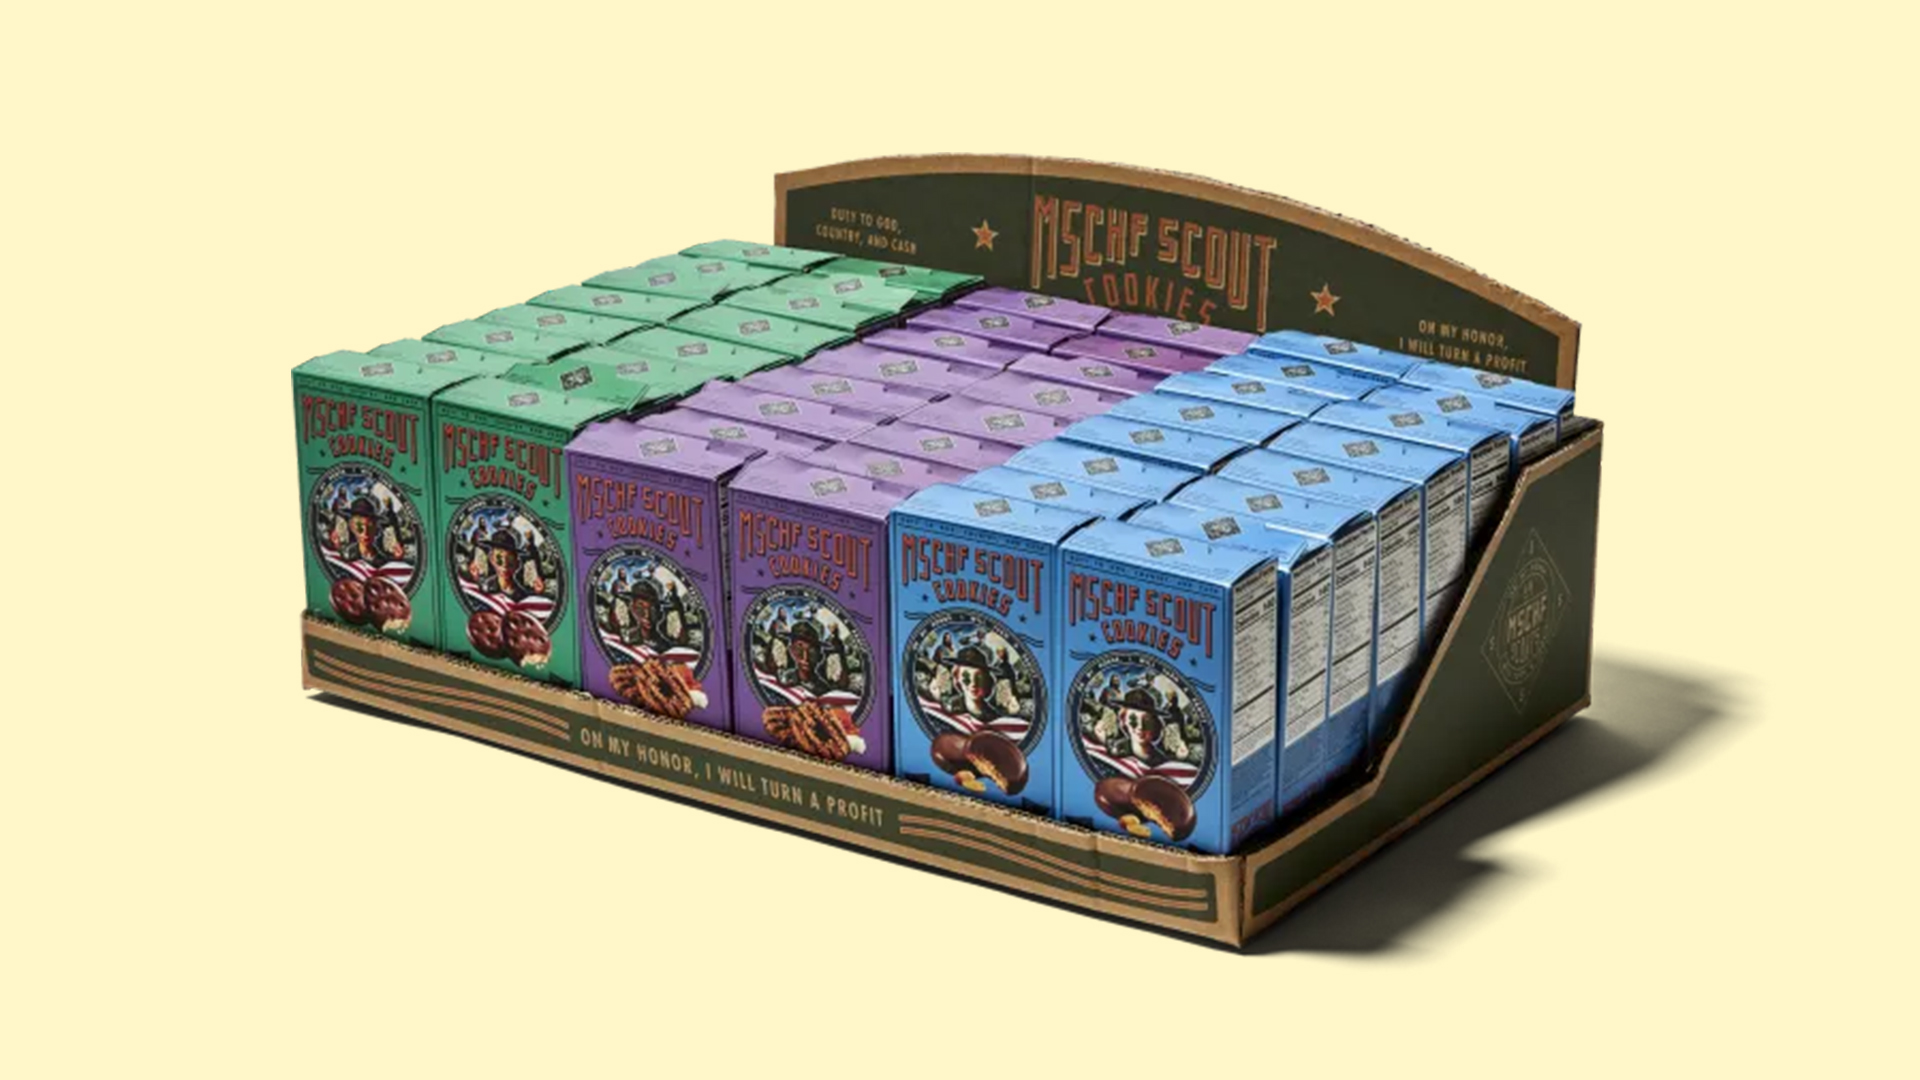 MSCHF Scout Cookies collection